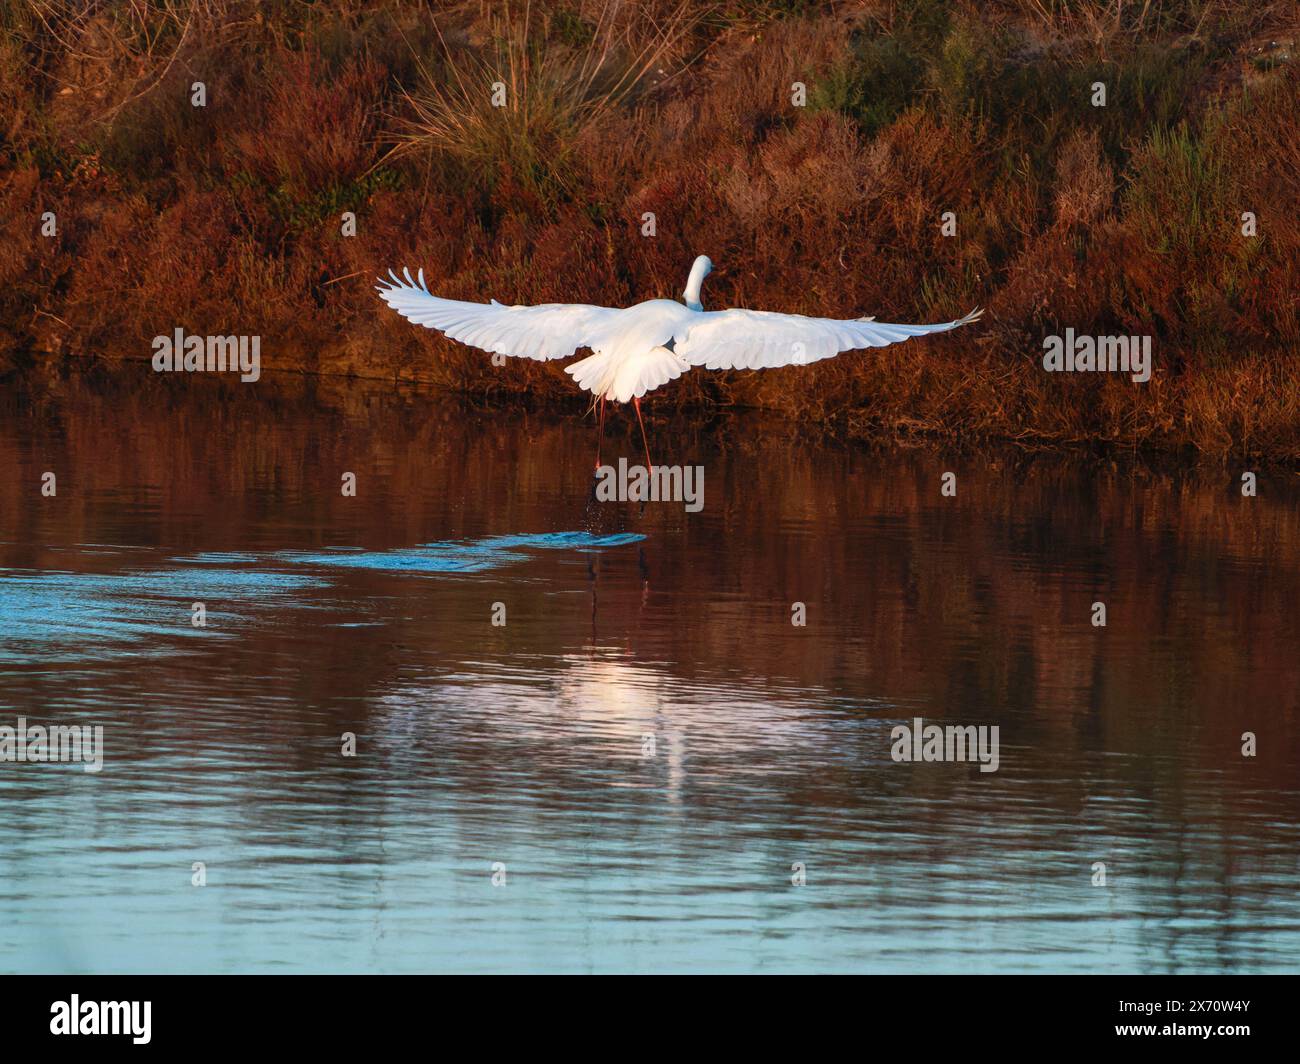 Great-throated (Ardea alba) also known as common egret. Little Egret (Egretta garzetta) Little Egret, Snowy Egret flying over water. Stock Photo